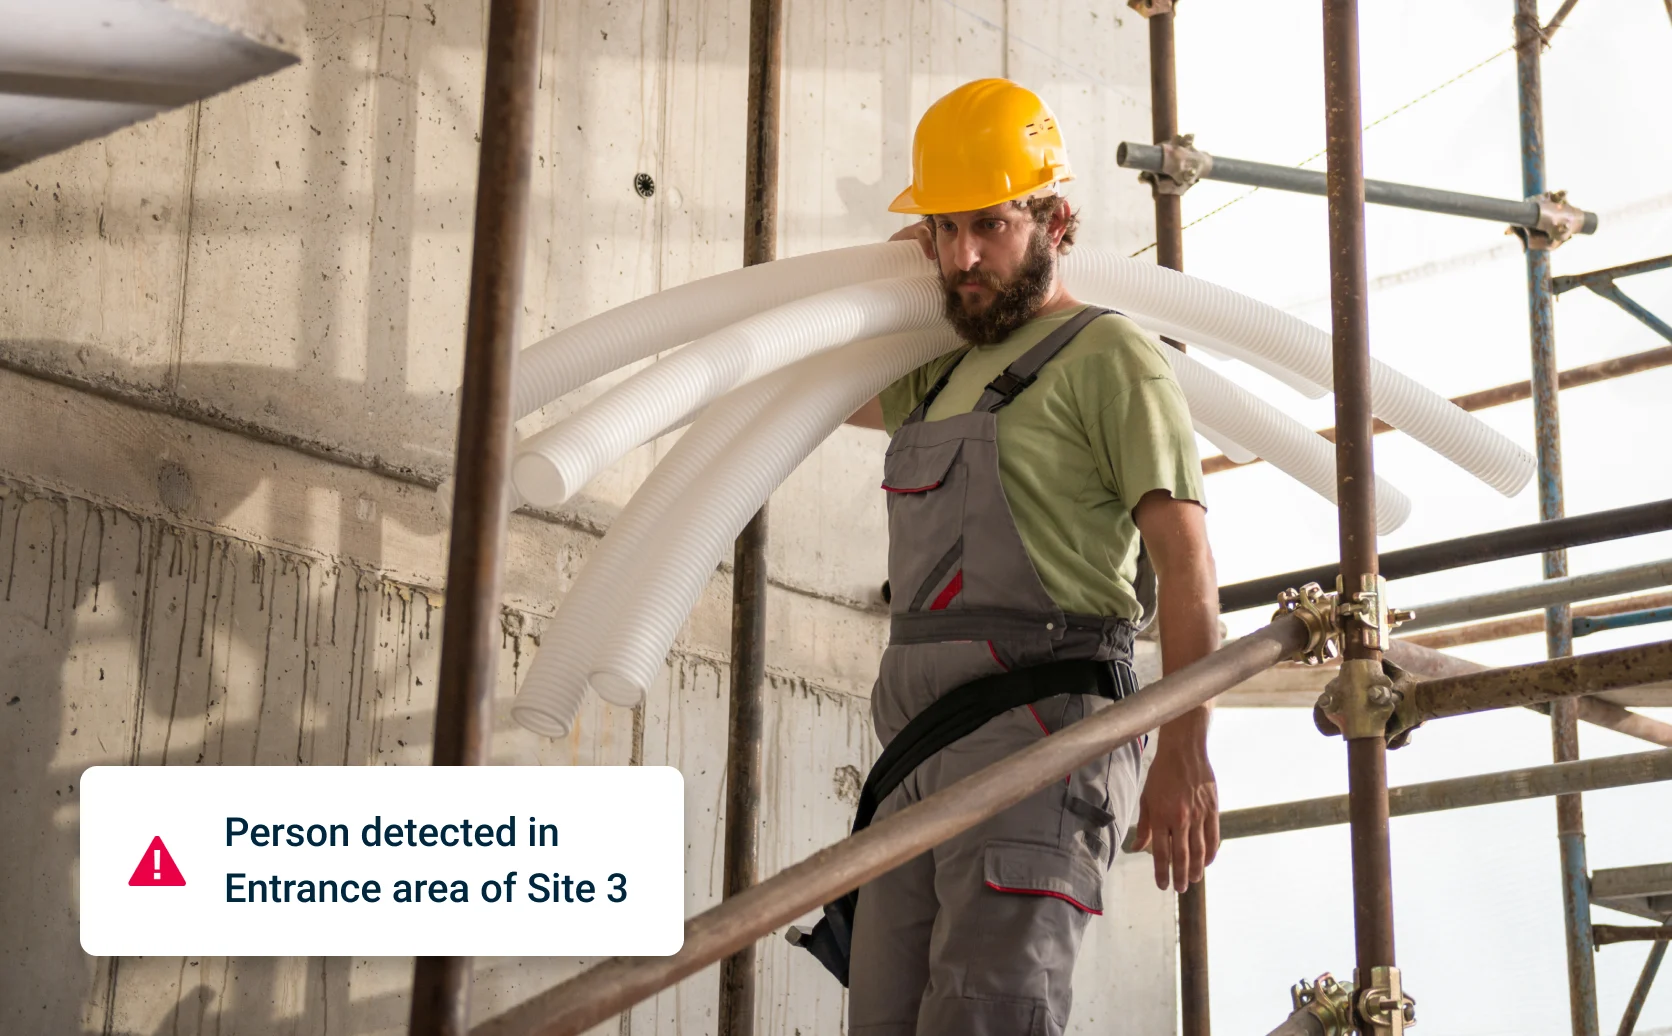 Image of a worker on a job site with an overlay showing the alert: “Person detected in Entrance area of Site 3”